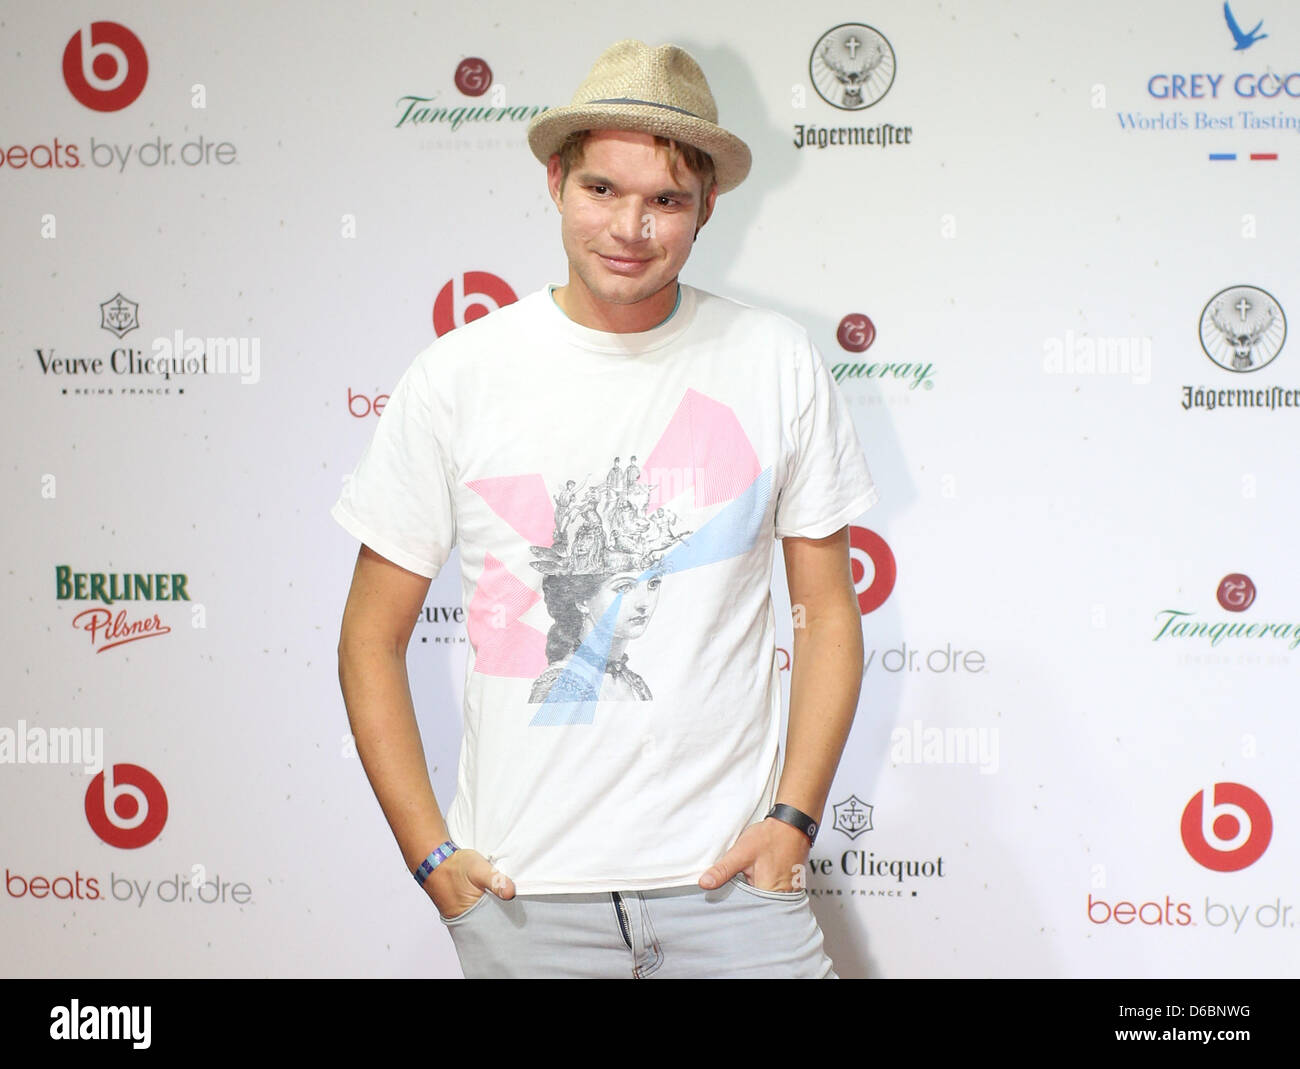 Actor Tobias Schenke poses for pictures on the red carpet outside the nightclub 'Spindler und Klatt' in Berlin, Germany, 04 September 2012. The 'Beats Berlin Party' was sponsored by the 'Beats by Dr. Dre' headphone brand and attracted many celebrities. Photo: Florian Schuh Stock Photo